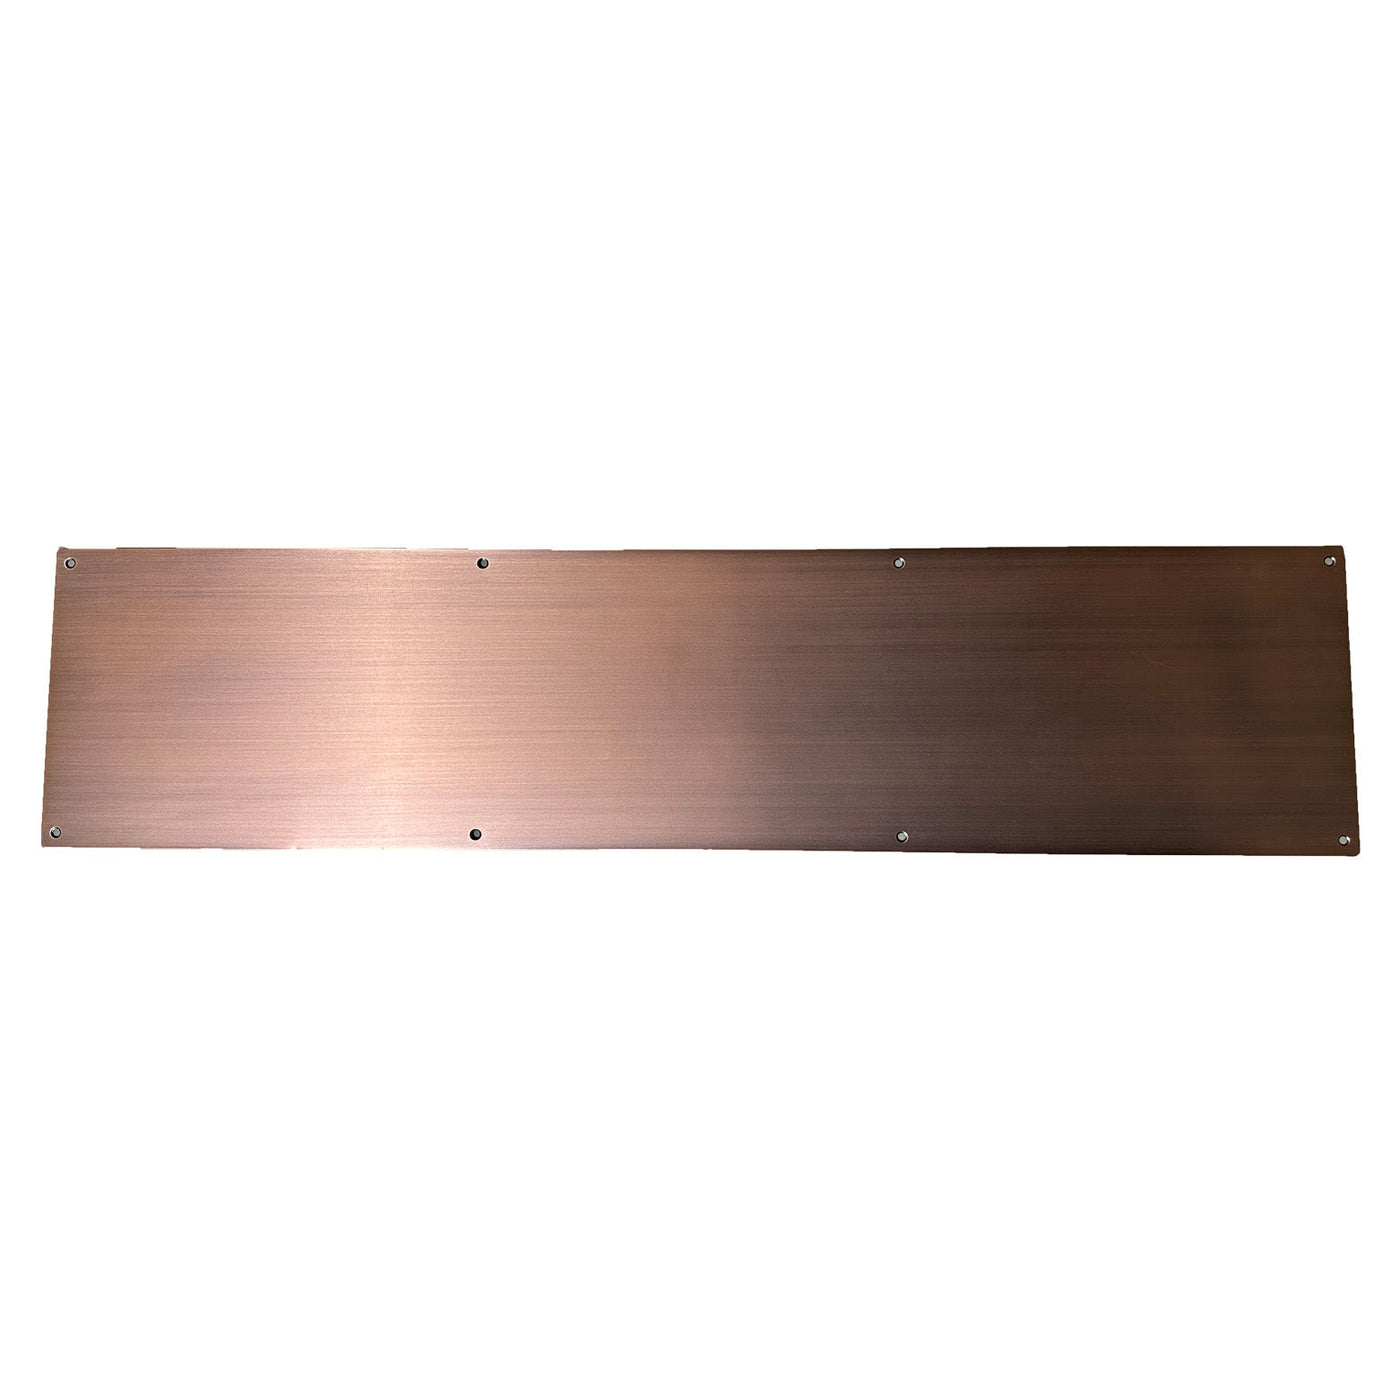 6 Inch x 34 Inch Stainless Steel Kick Plate (Antique Copper Finish)